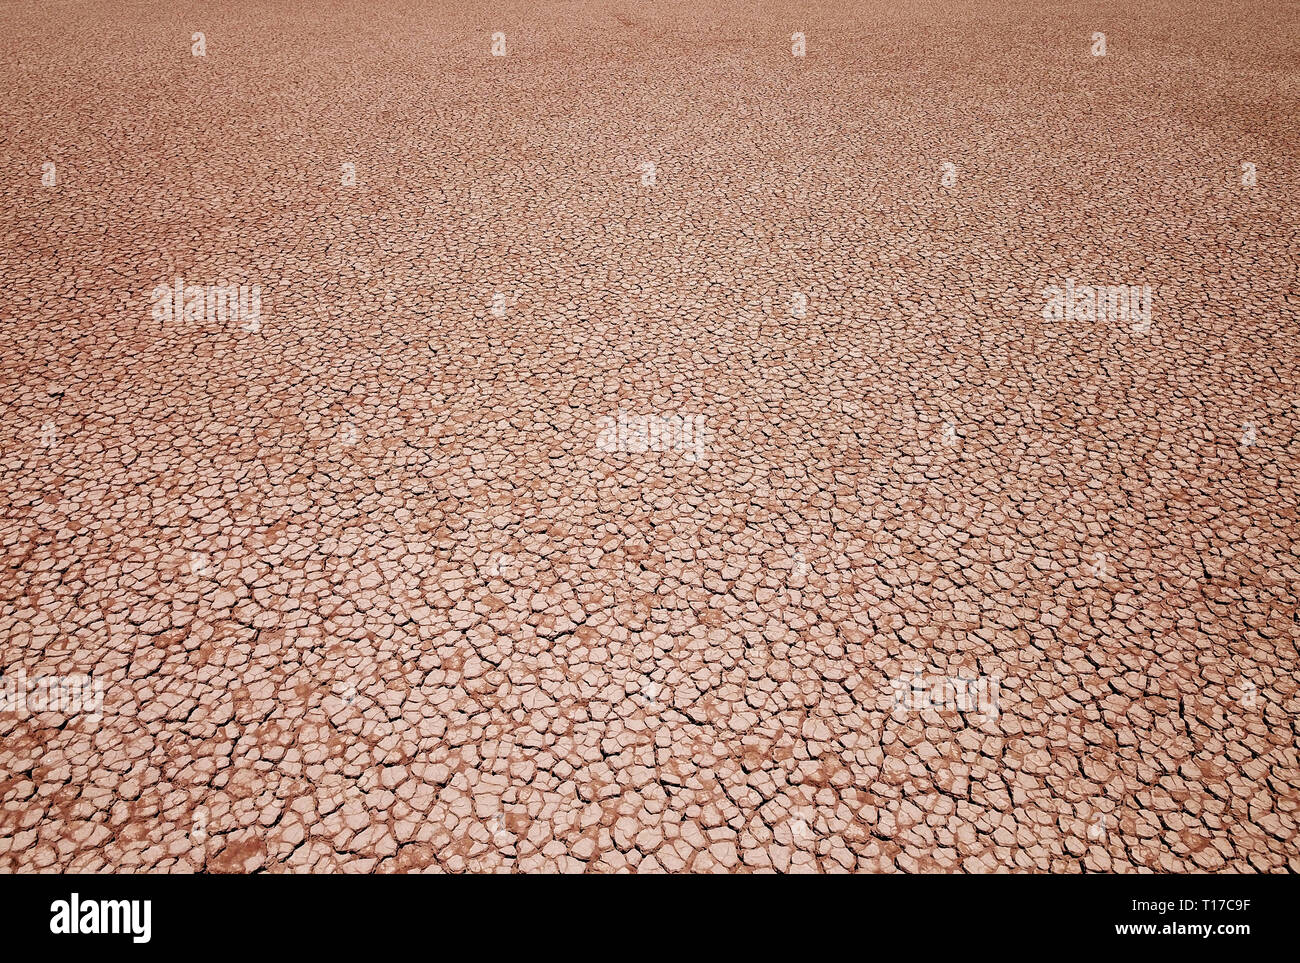 Close up of a dried up lake due to climate change Stock Photo